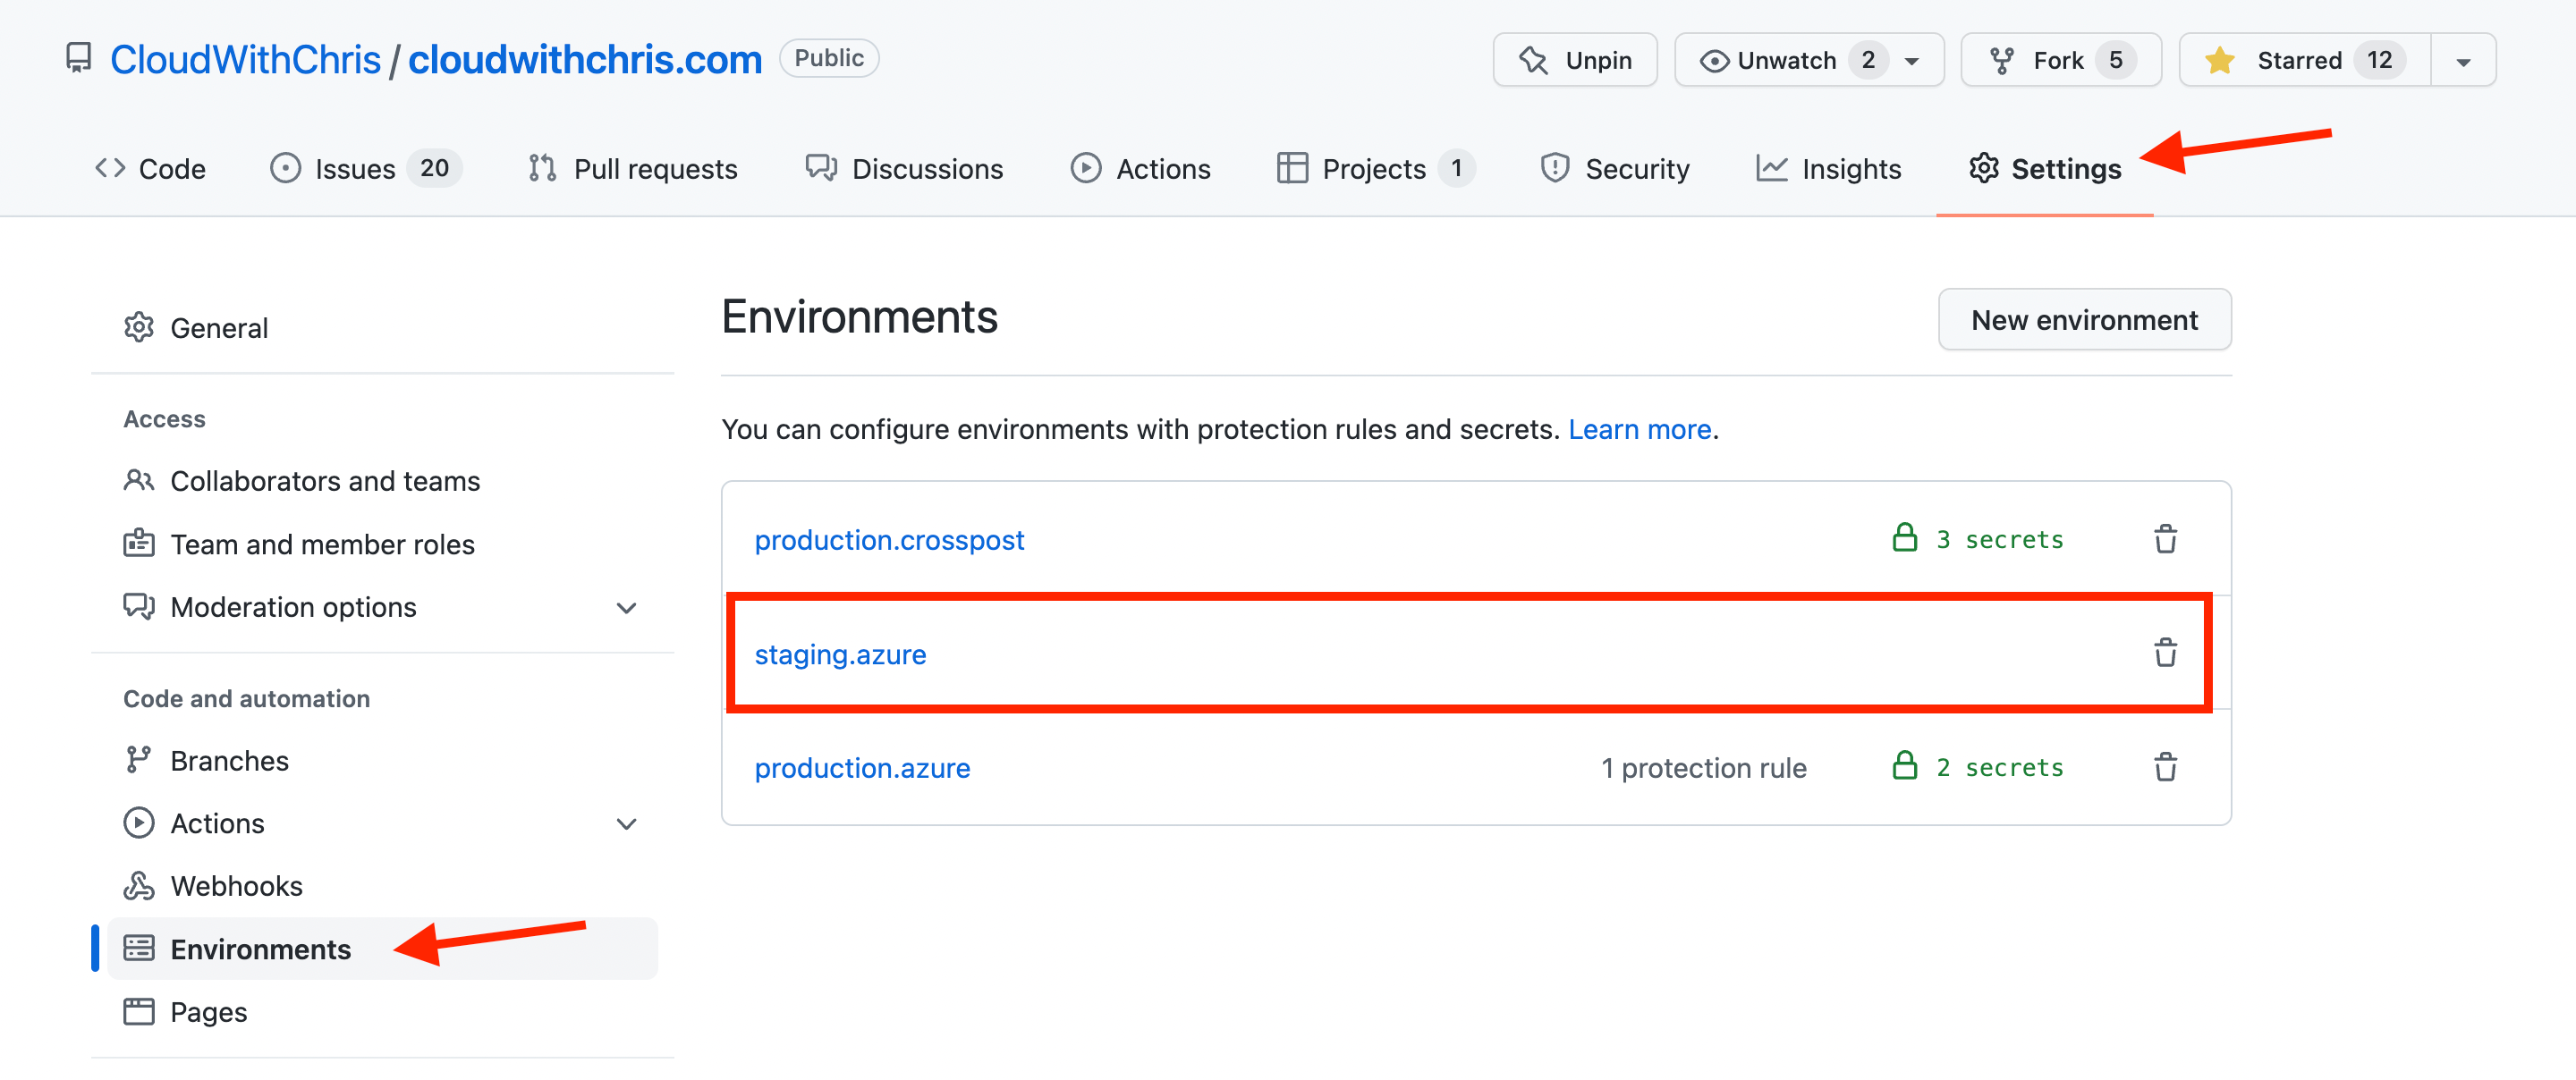 Screenshot showing the environments configured in the CloudWithChris/cloudwithchris.com GitHub repository. There are 3 environments - production.crosspost, staging.azure and production.azure.